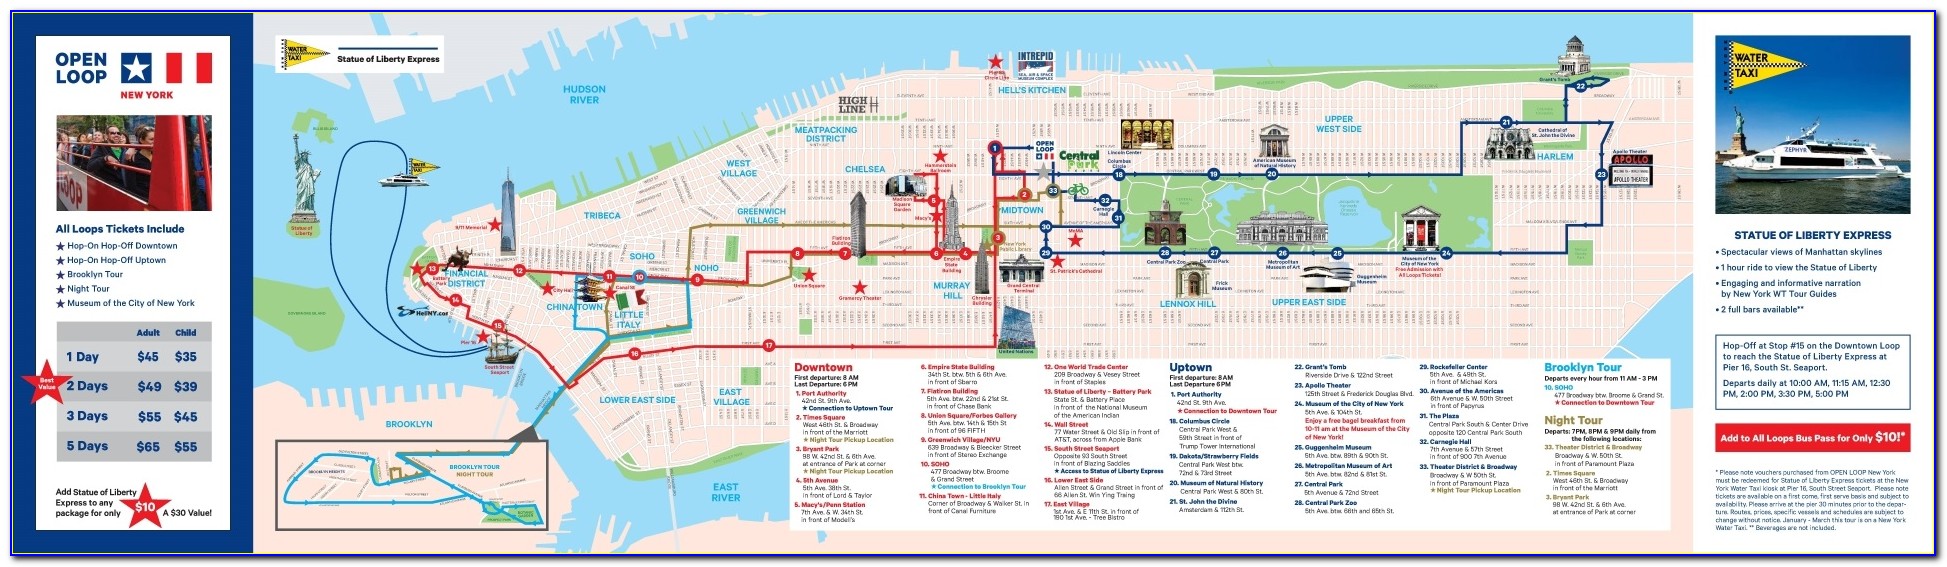 New York Hop On Hop Off Bus Route Map